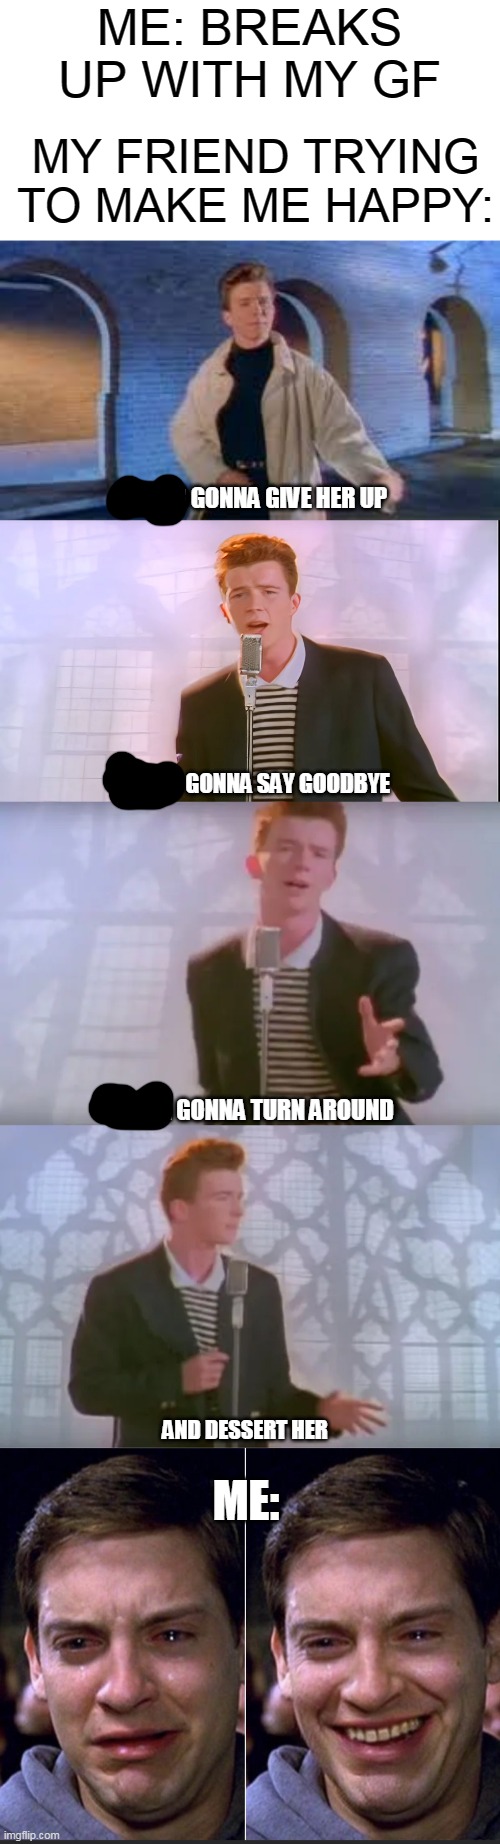 My longest meme so far, I woked hard on it | ME: BREAKS UP WITH MY GF; MY FRIEND TRYING TO MAKE ME HAPPY:; NEVER GONNA GIVE HER UP; NEVER GONNA SAY GOODBYE; NEVER GONNA TURN AROUND; AND DESSERT HER; ME: | image tagged in peter parker,rickrolled,rick astley,rick roll | made w/ Imgflip meme maker